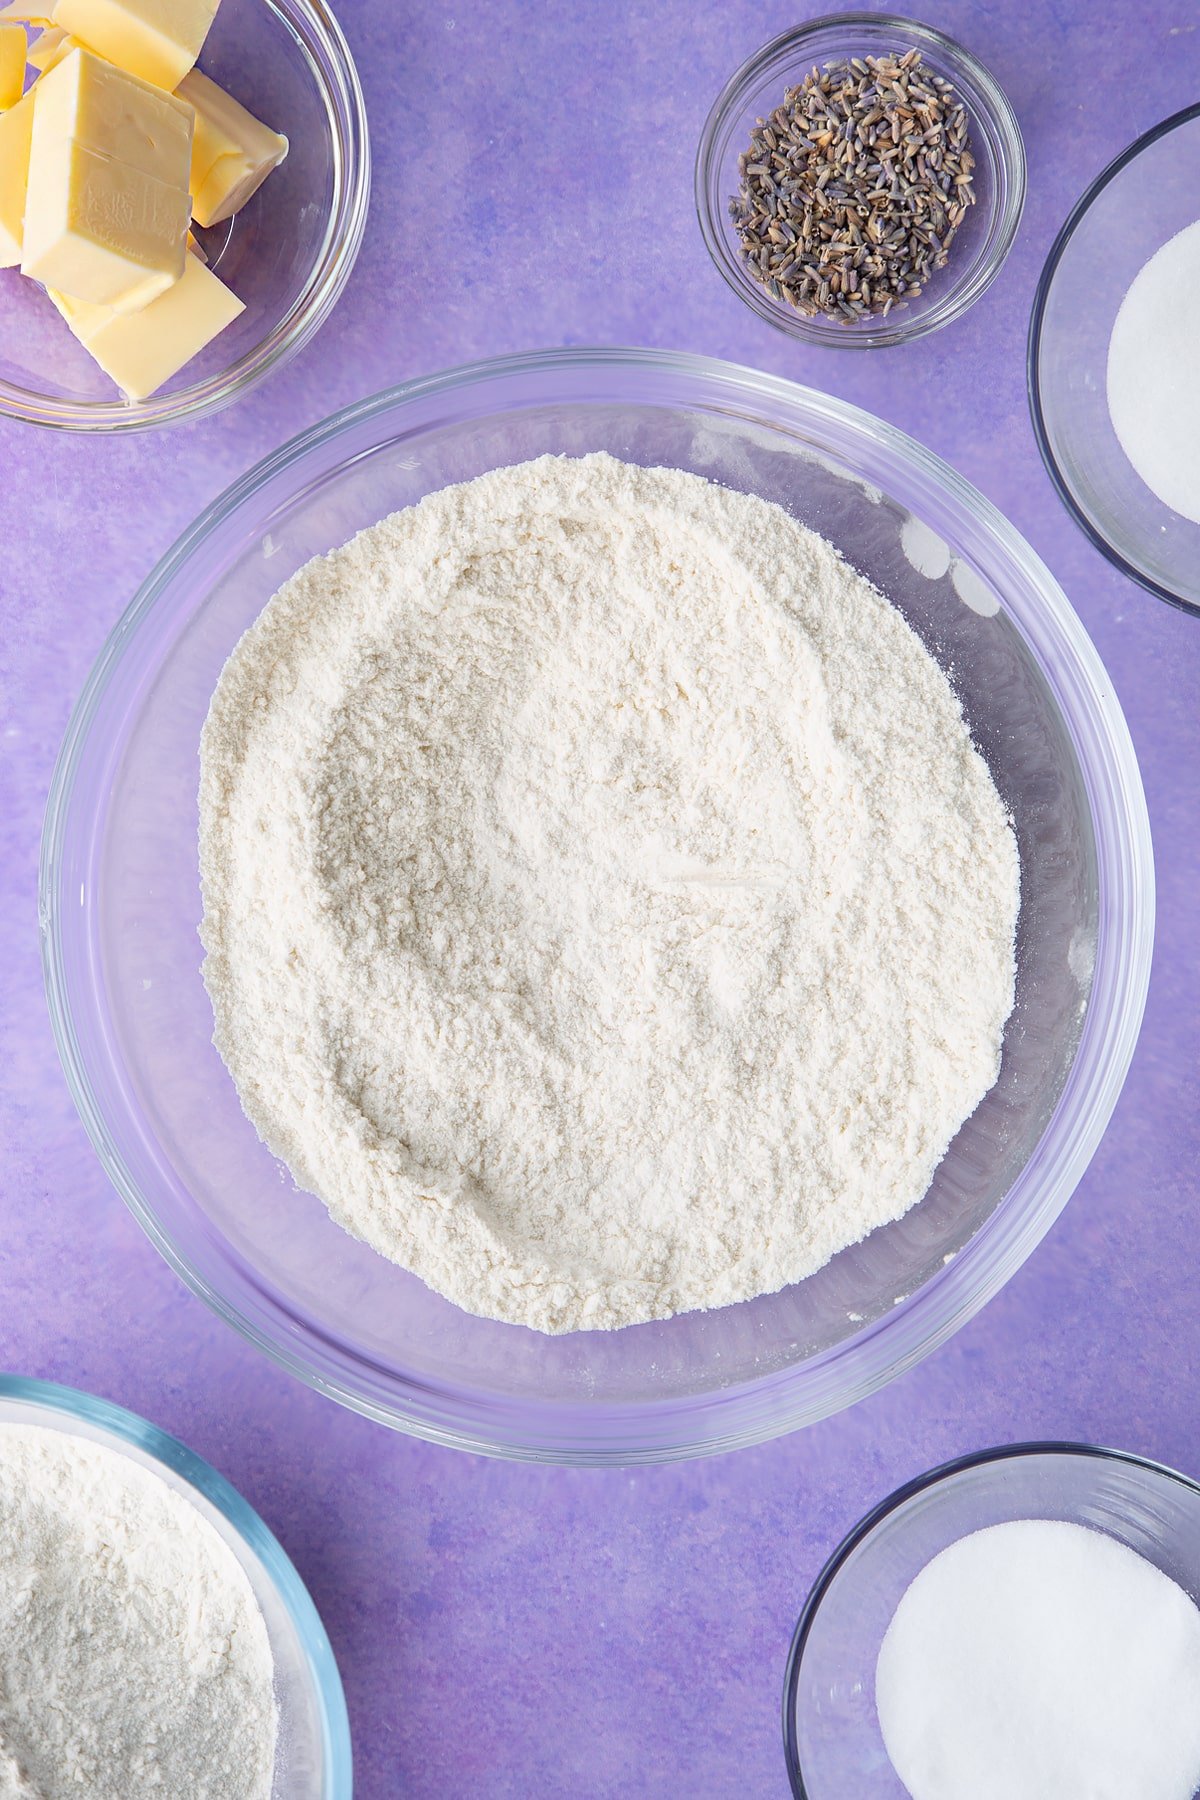 Flour and sugar mixed together in a bowl. Ingredients to make lavender shortbread cookies.